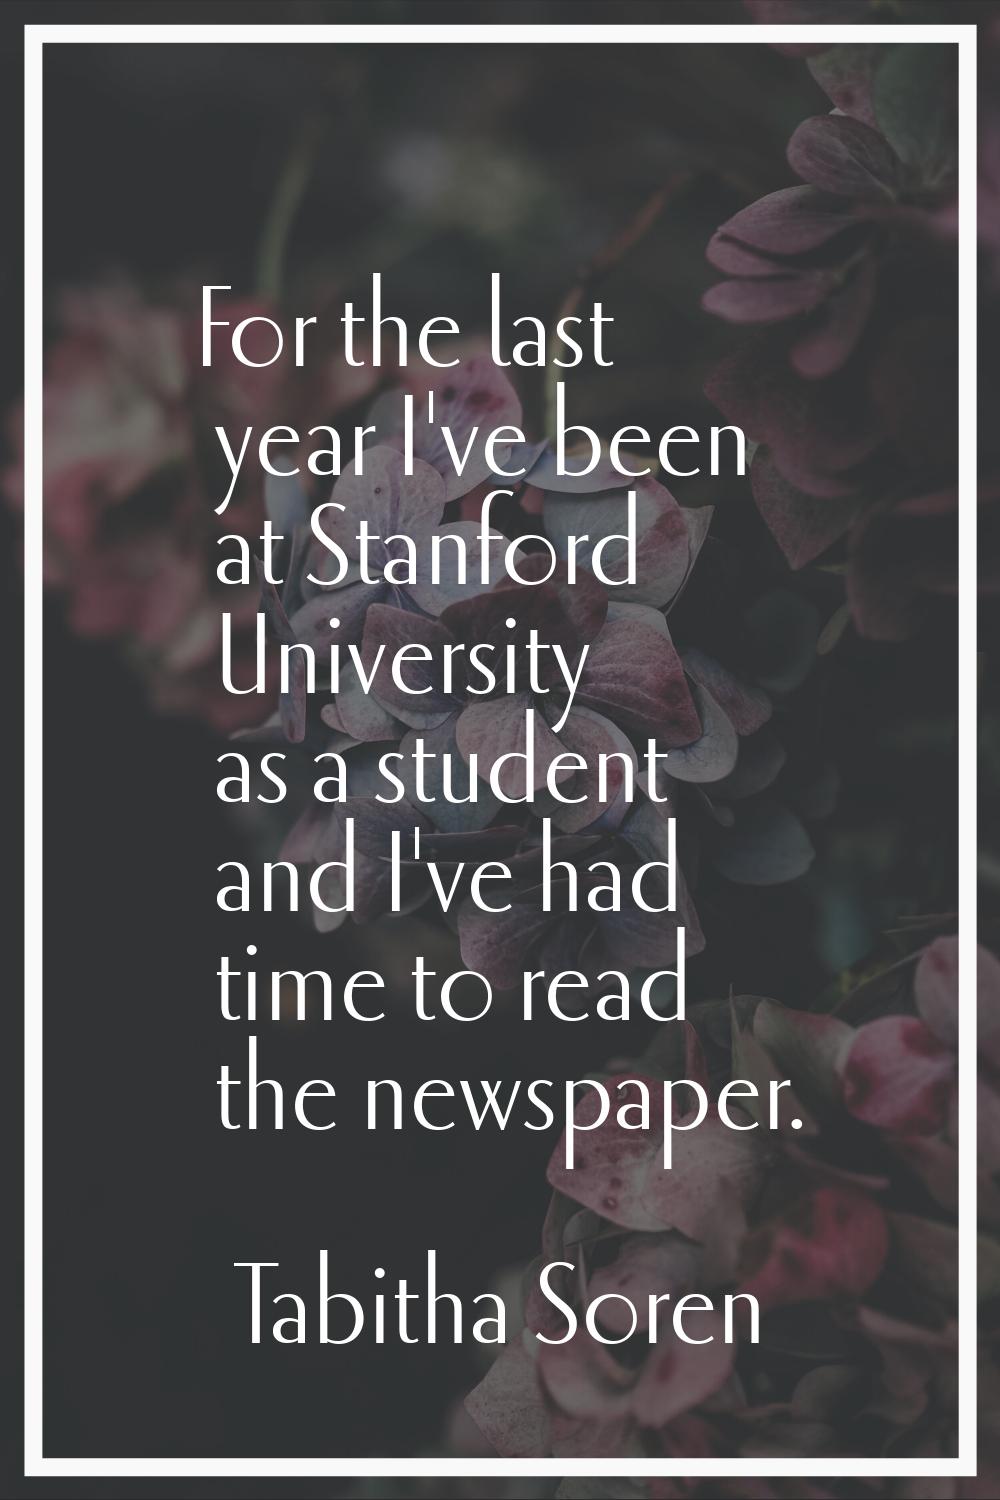 For the last year I've been at Stanford University as a student and I've had time to read the newsp